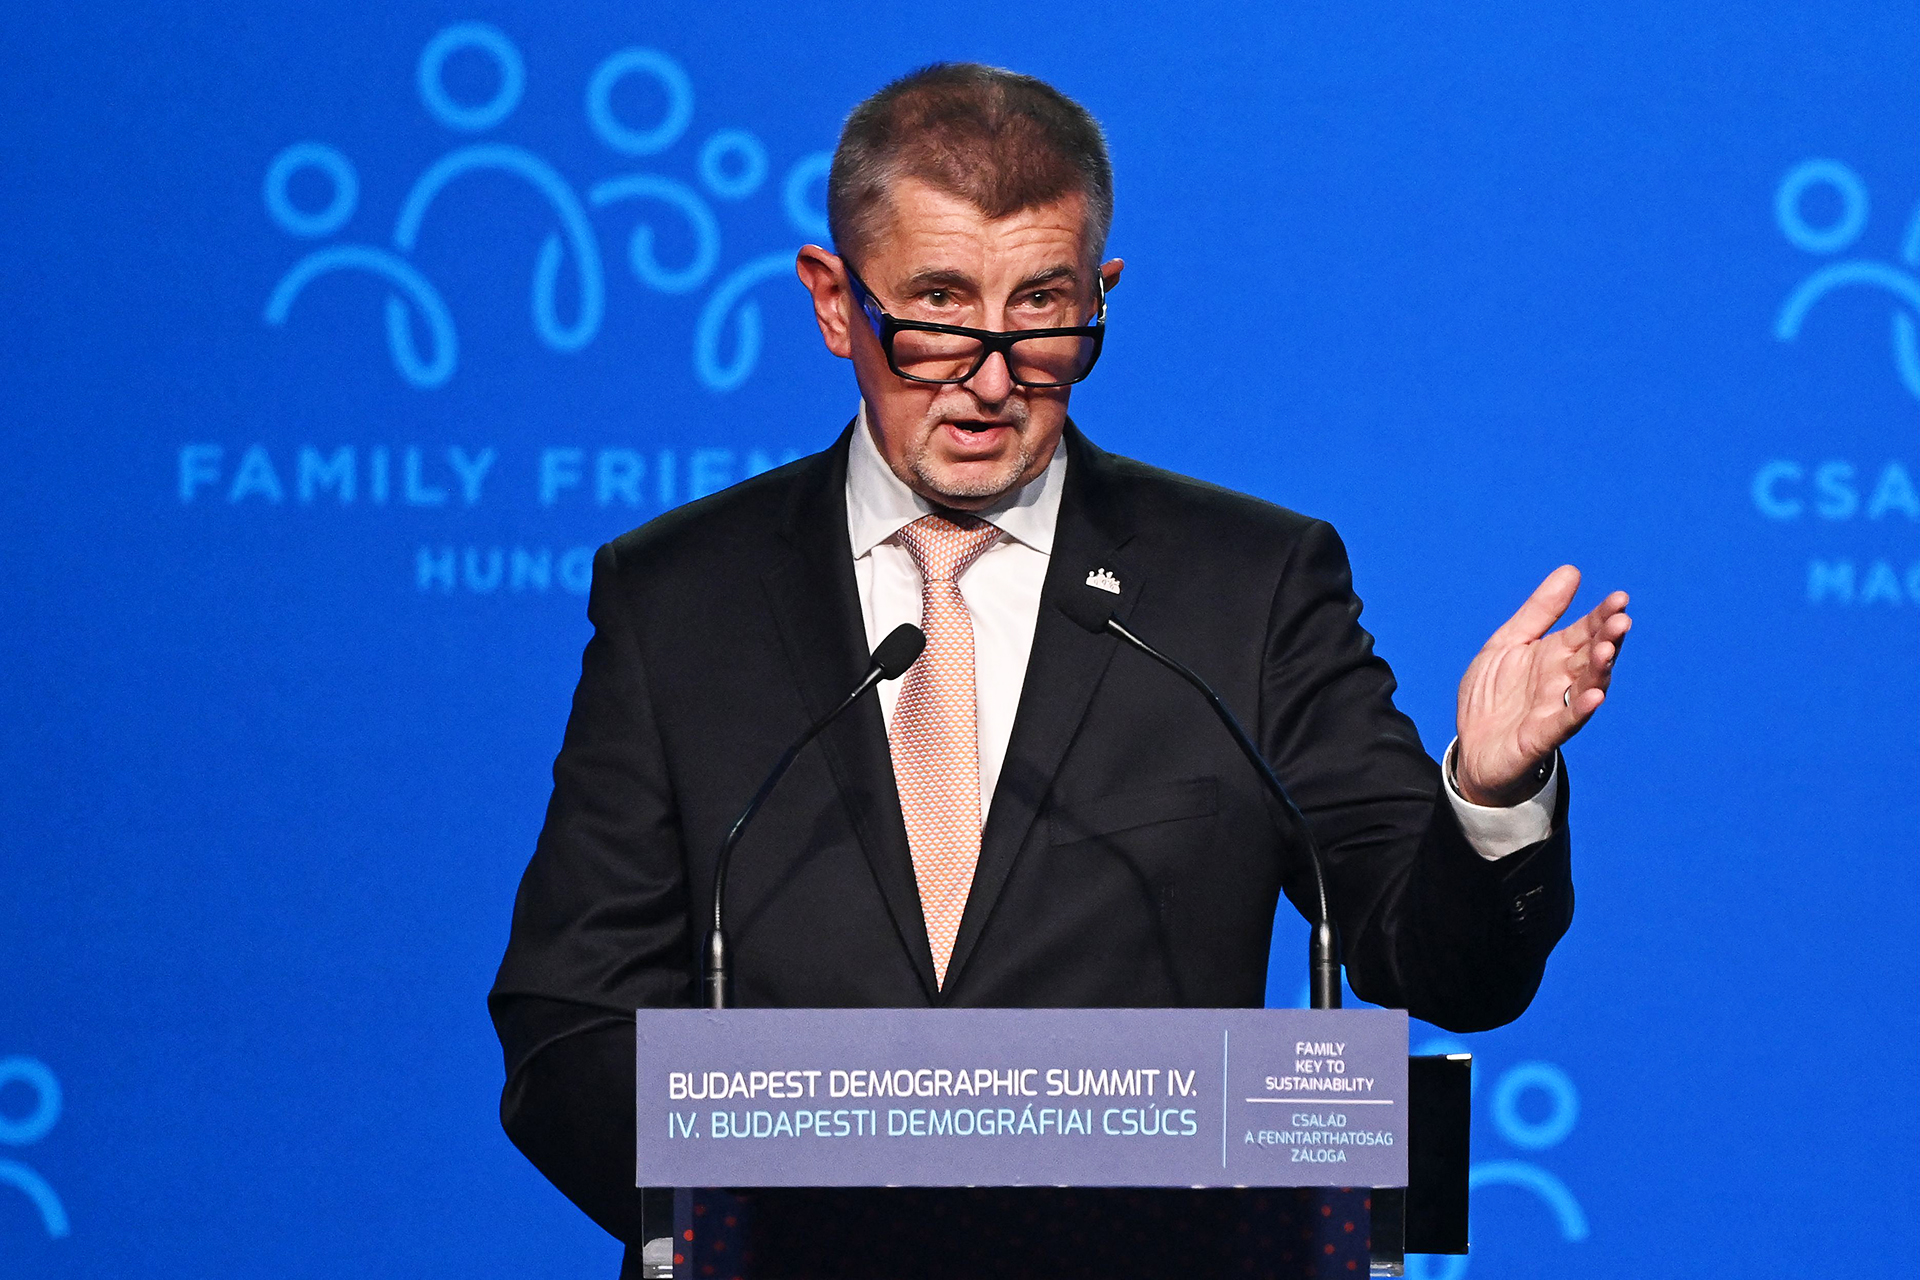 Finnish Member of the European Parliament: The link between the Czech Prime Minister Pandora will be raised at the meeting